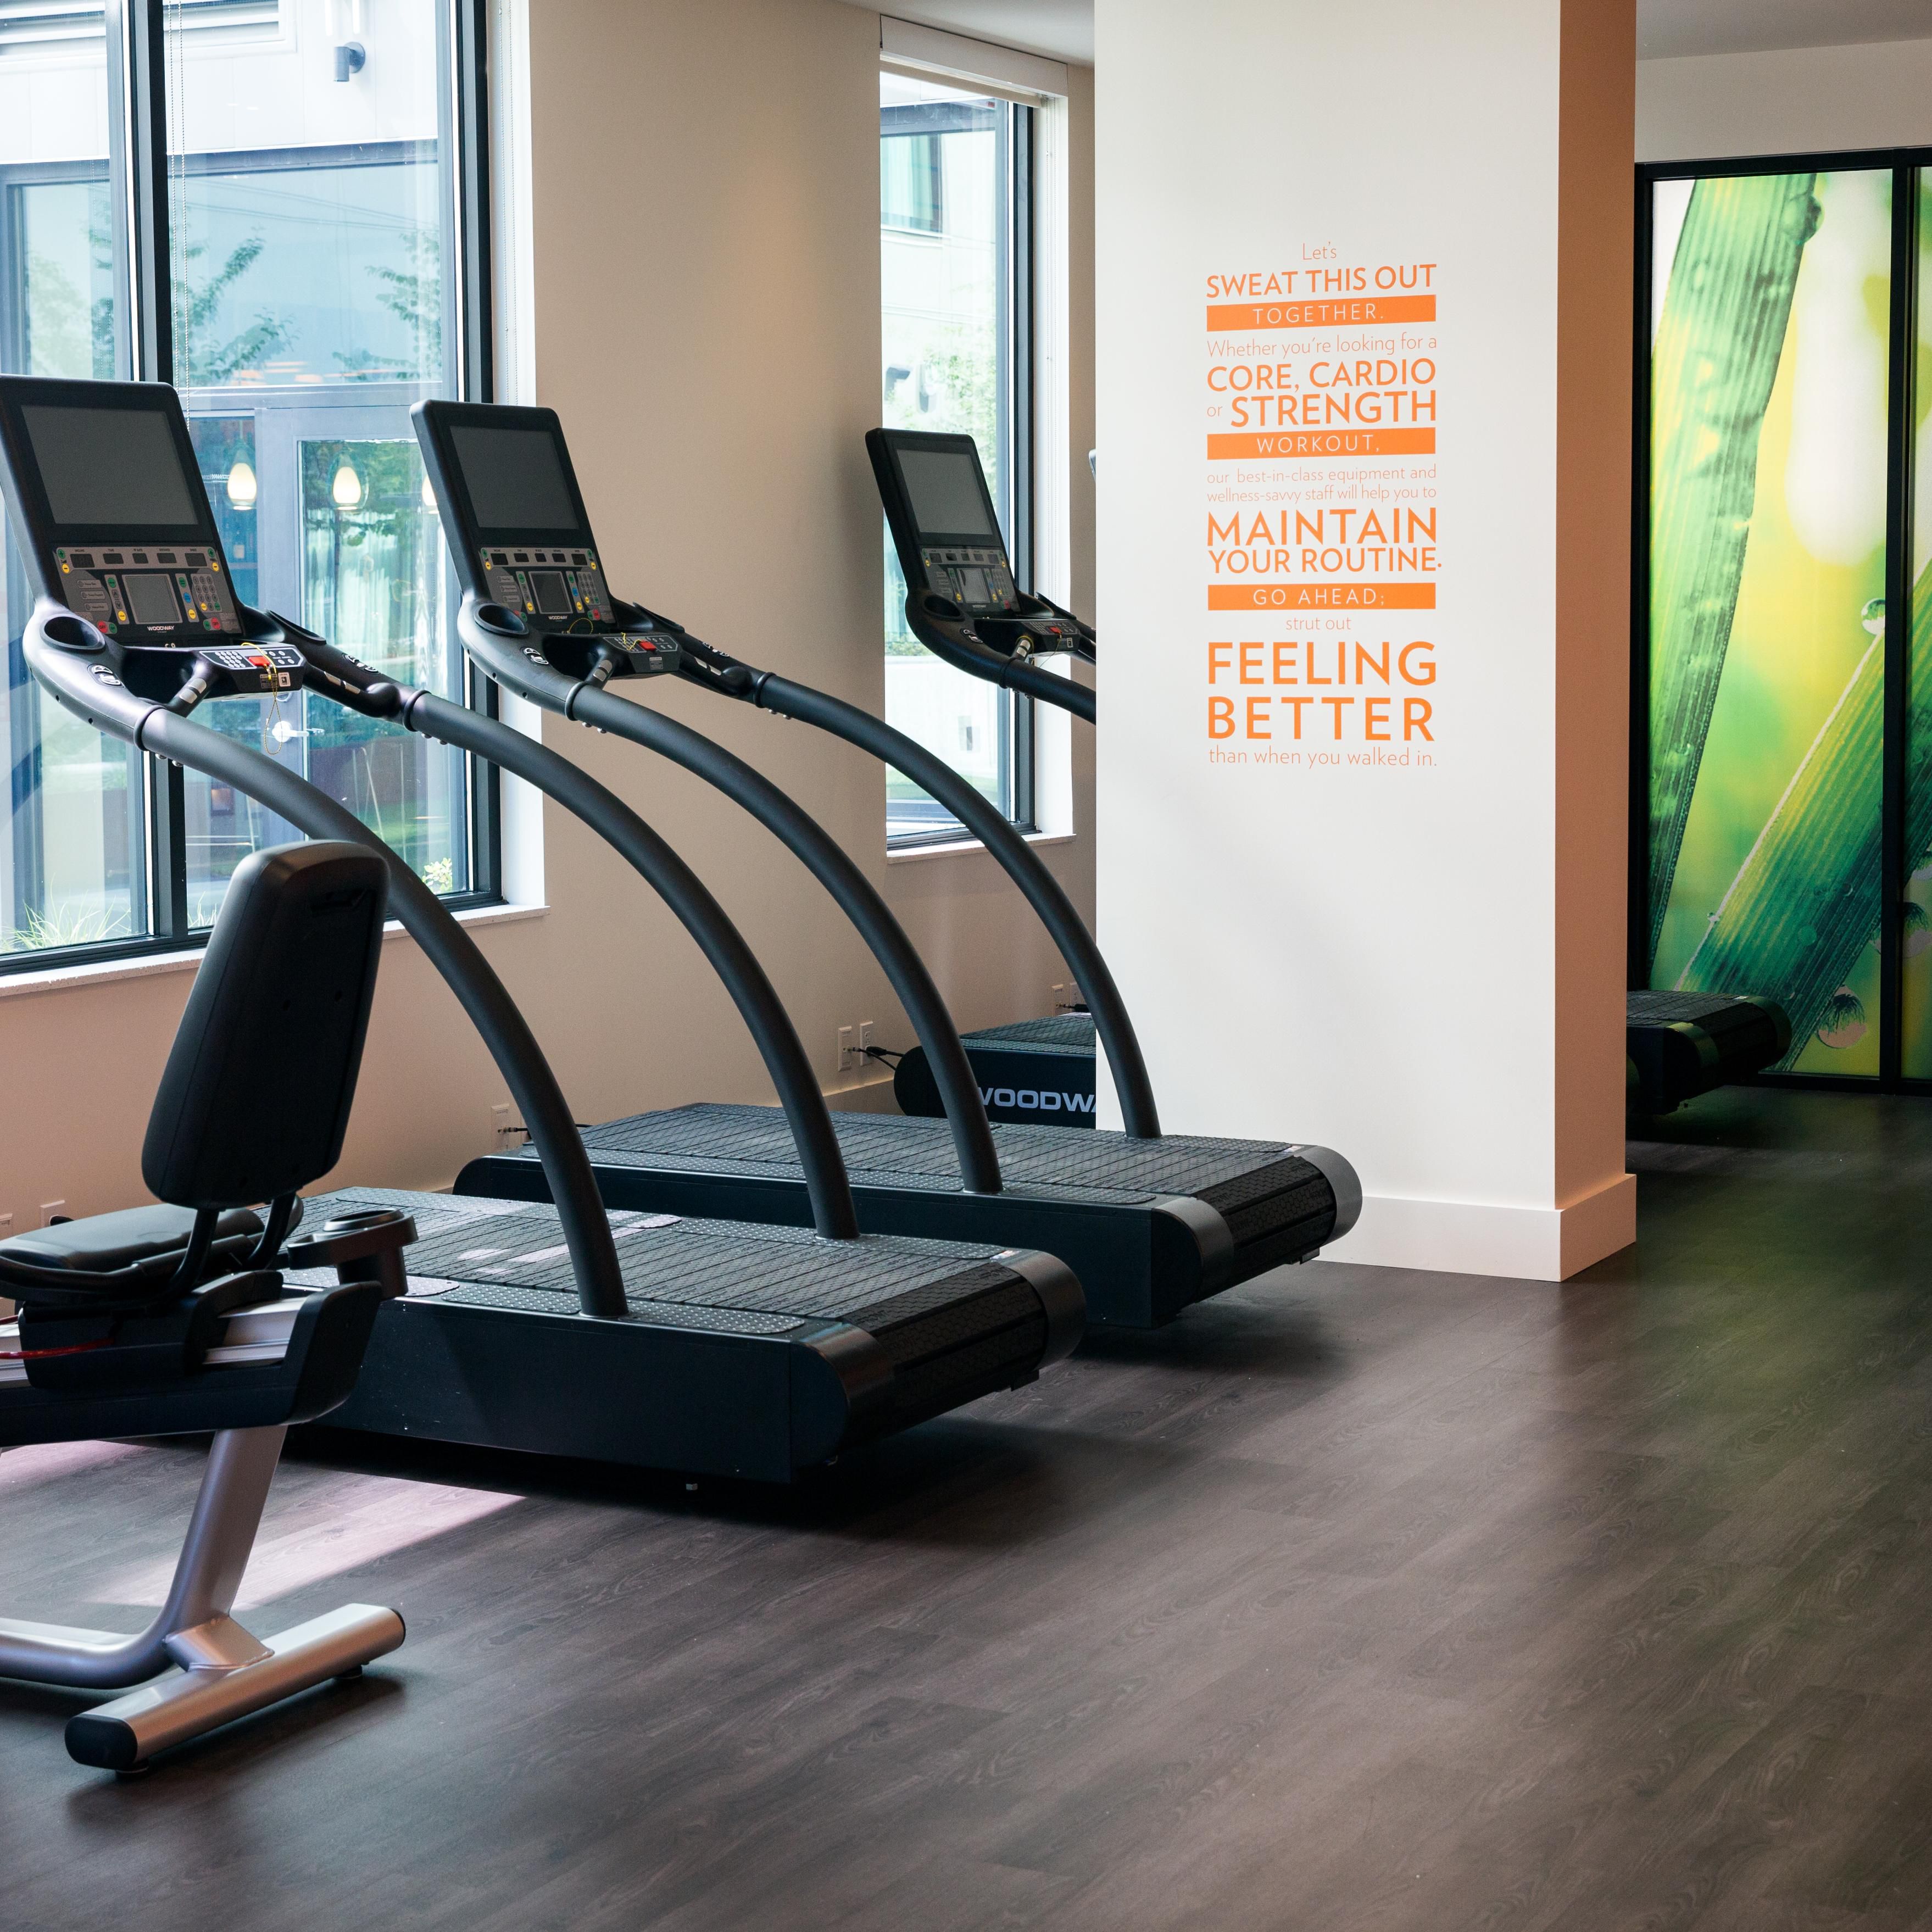 7 Hotels with Peloton Equipment to Keep Your Routine Up While You